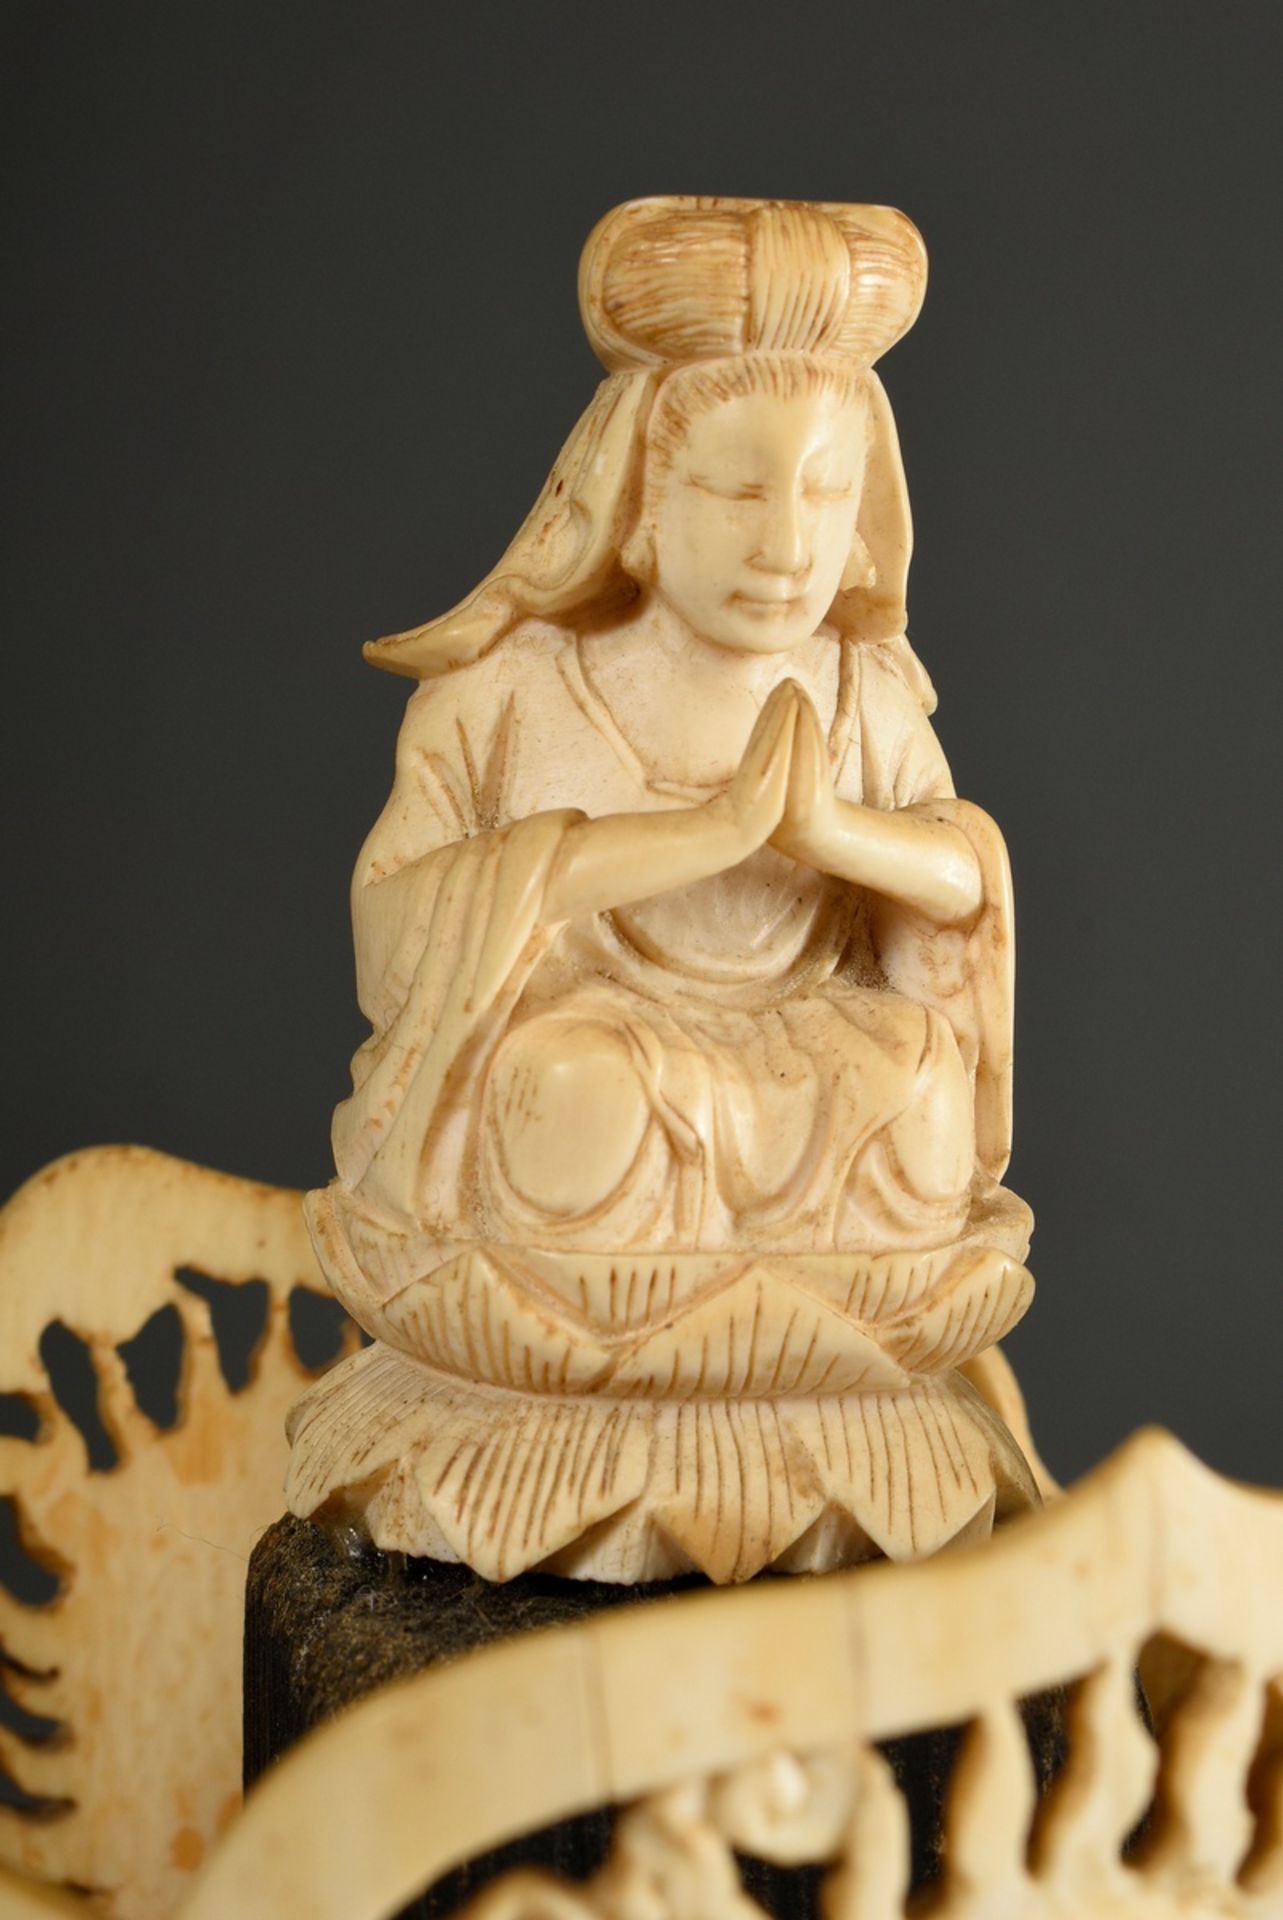 Large ivory carving ‘Head of Guanyin’ with openwork crown and depiction of Buddha with two adorants - Image 4 of 11